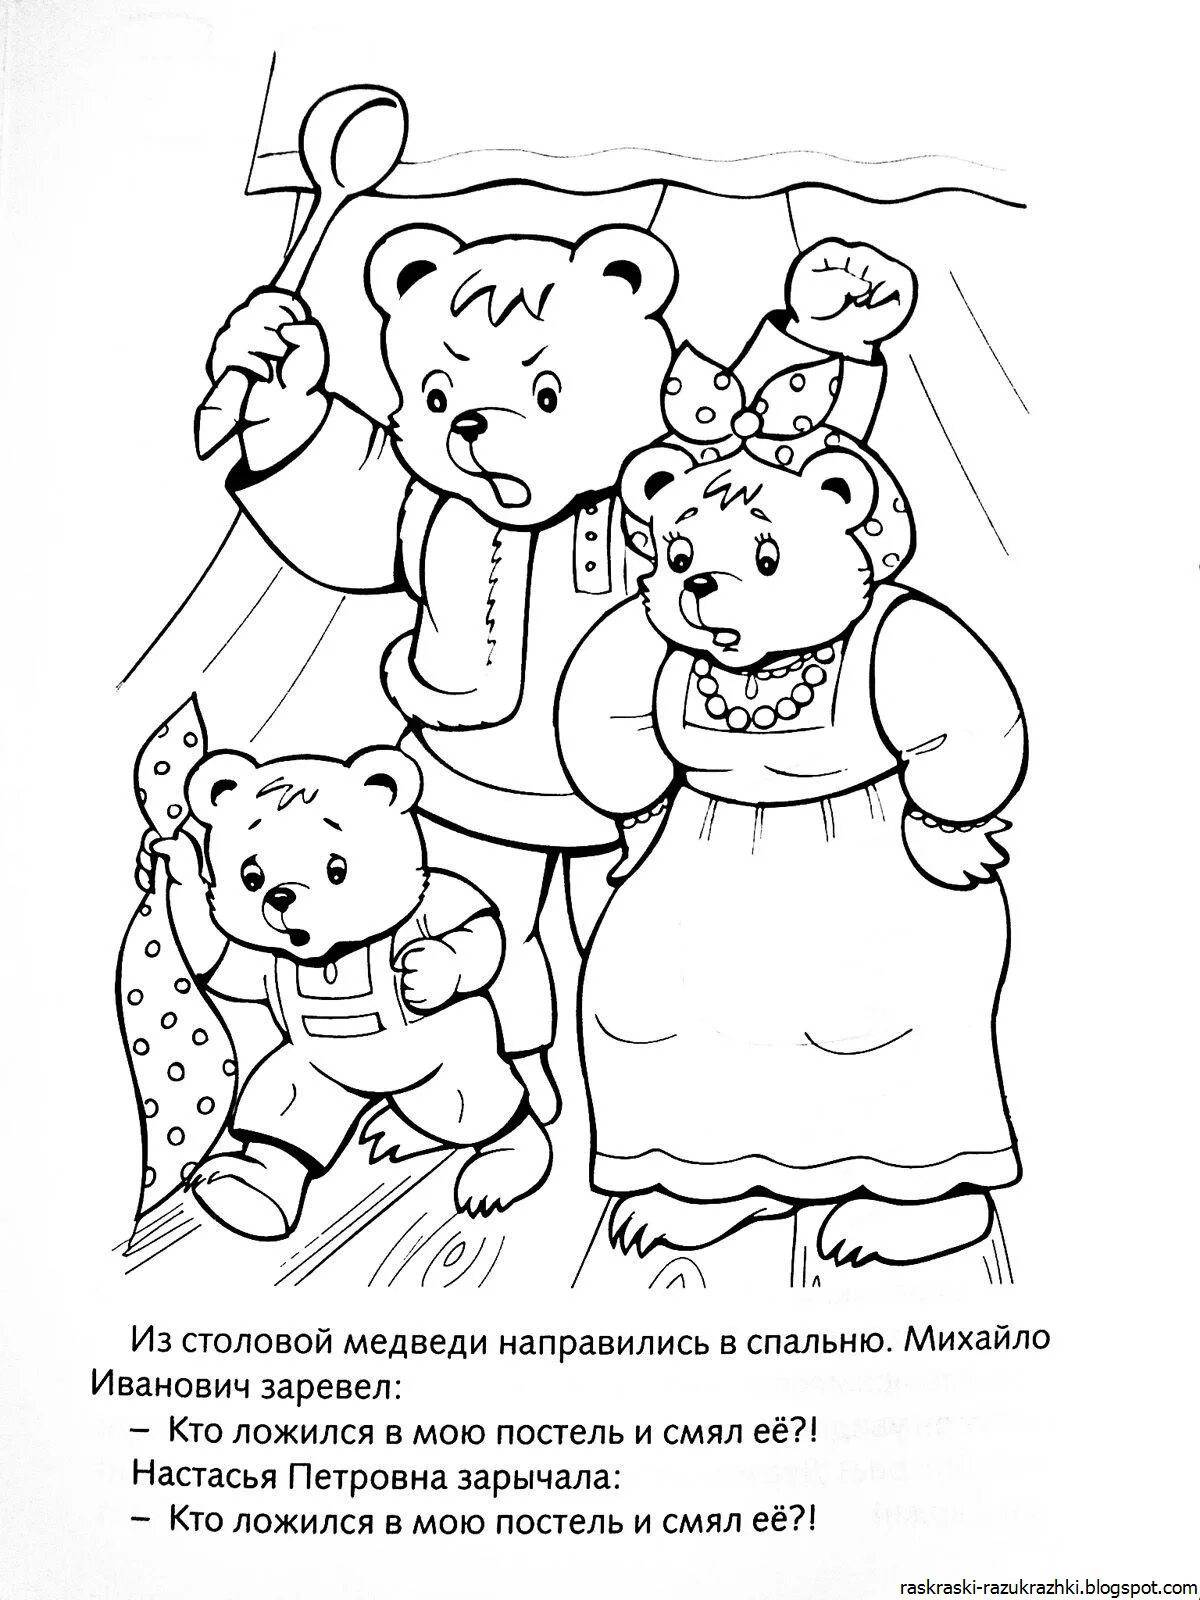 Royal coloring book based on fairy tales for children Russian folk